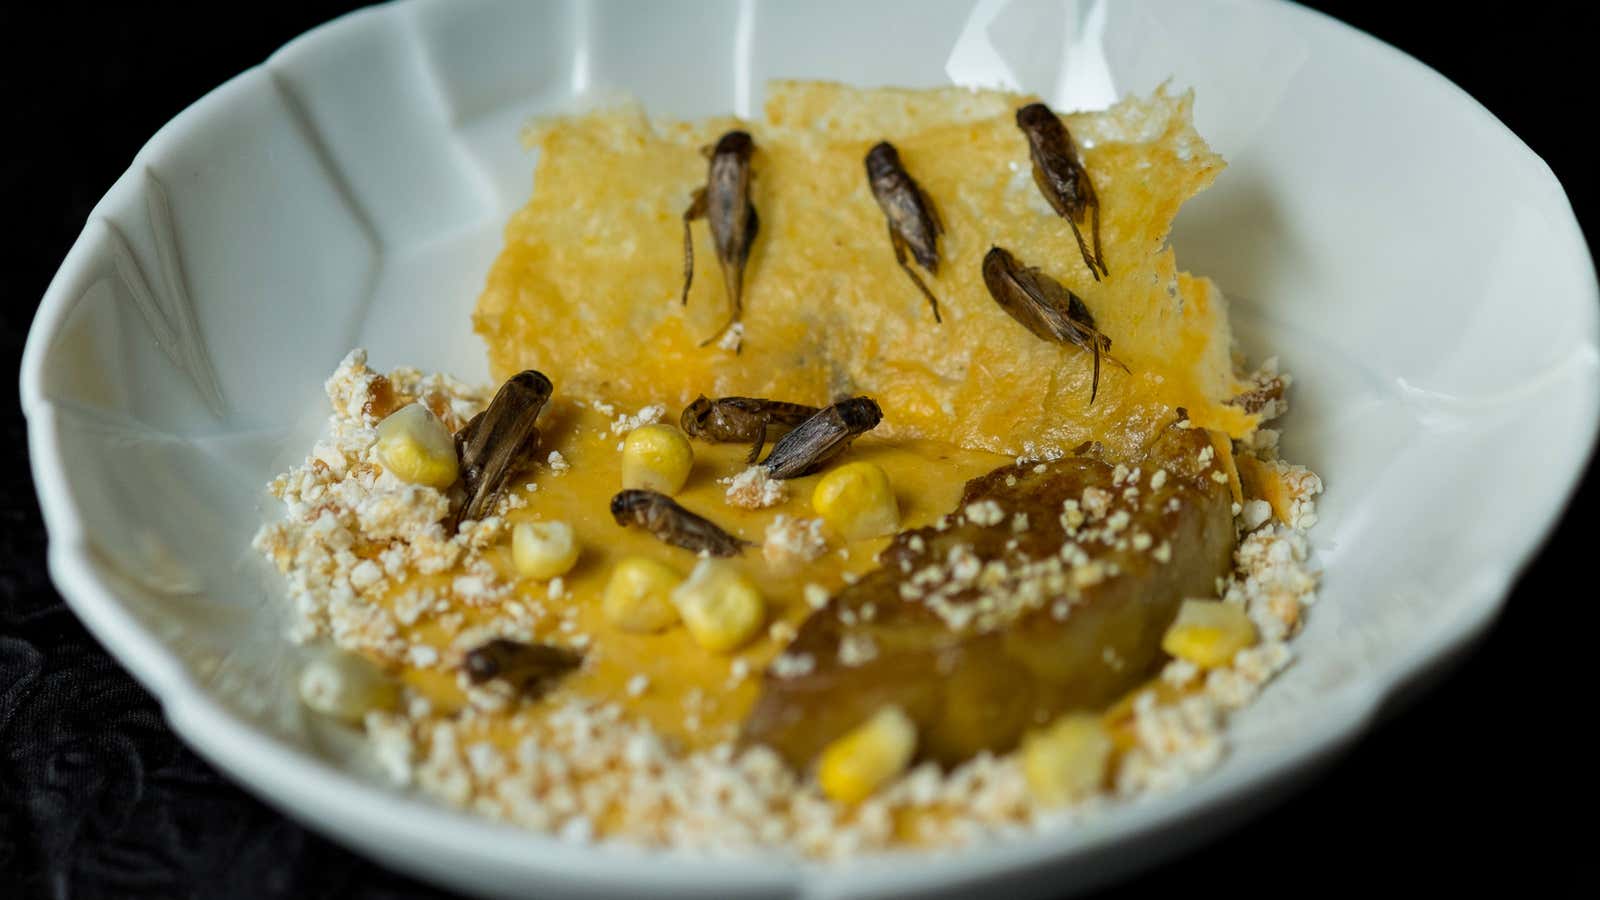 Creamy corn with crickets, care of a French Michelin star restaurant.